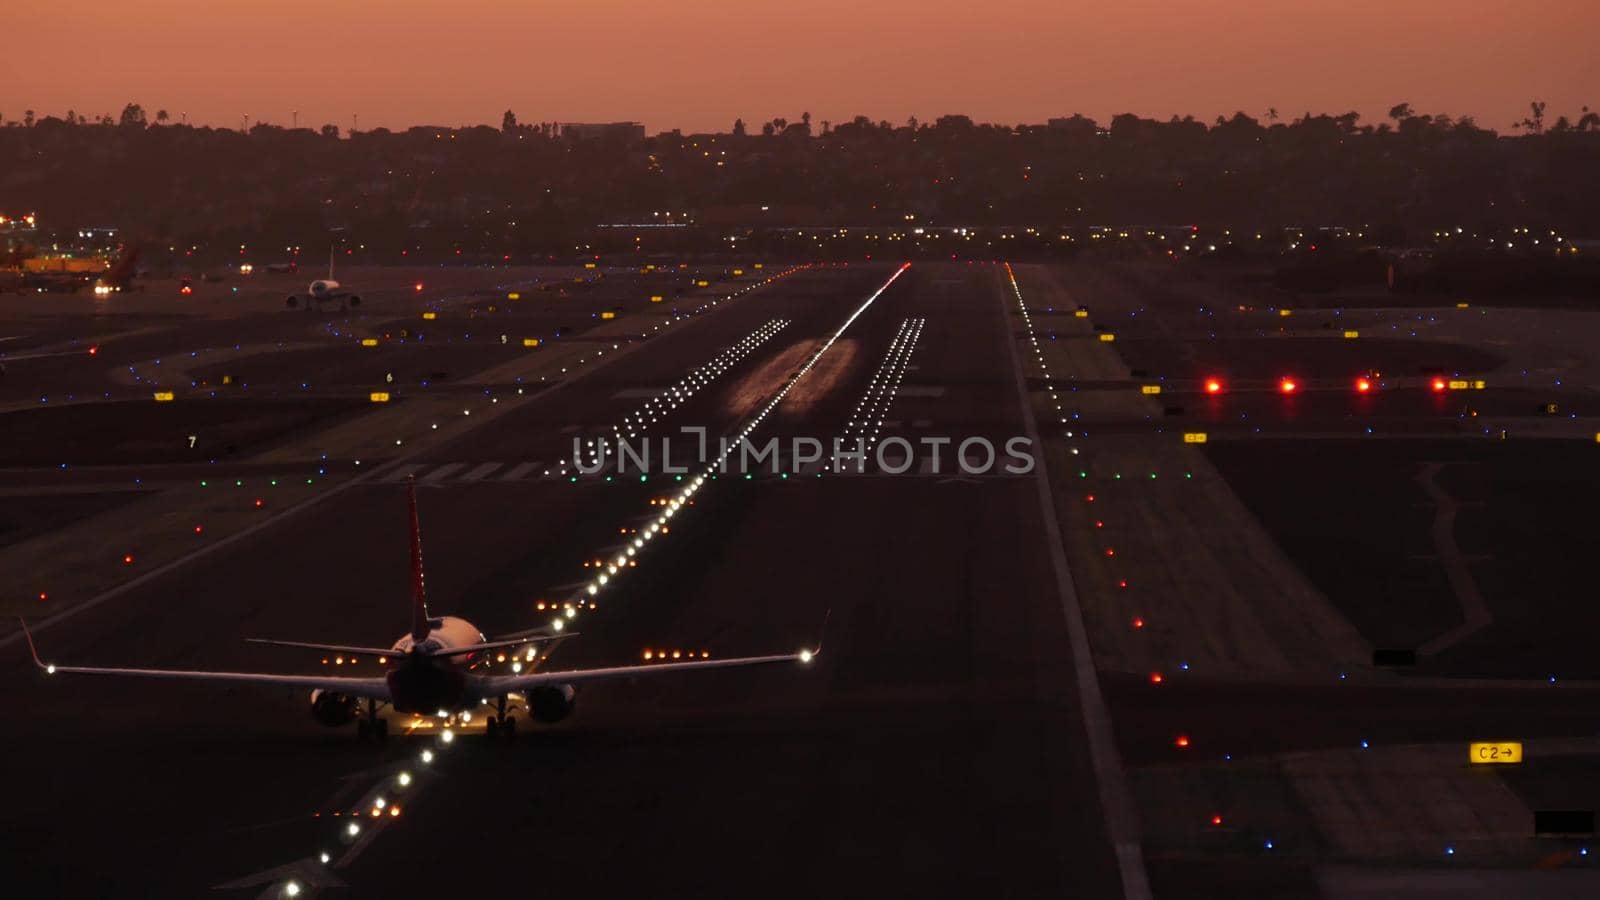 Airport runway lights at night, plane or airline taking off, airstrip at sunset. by DogoraSun